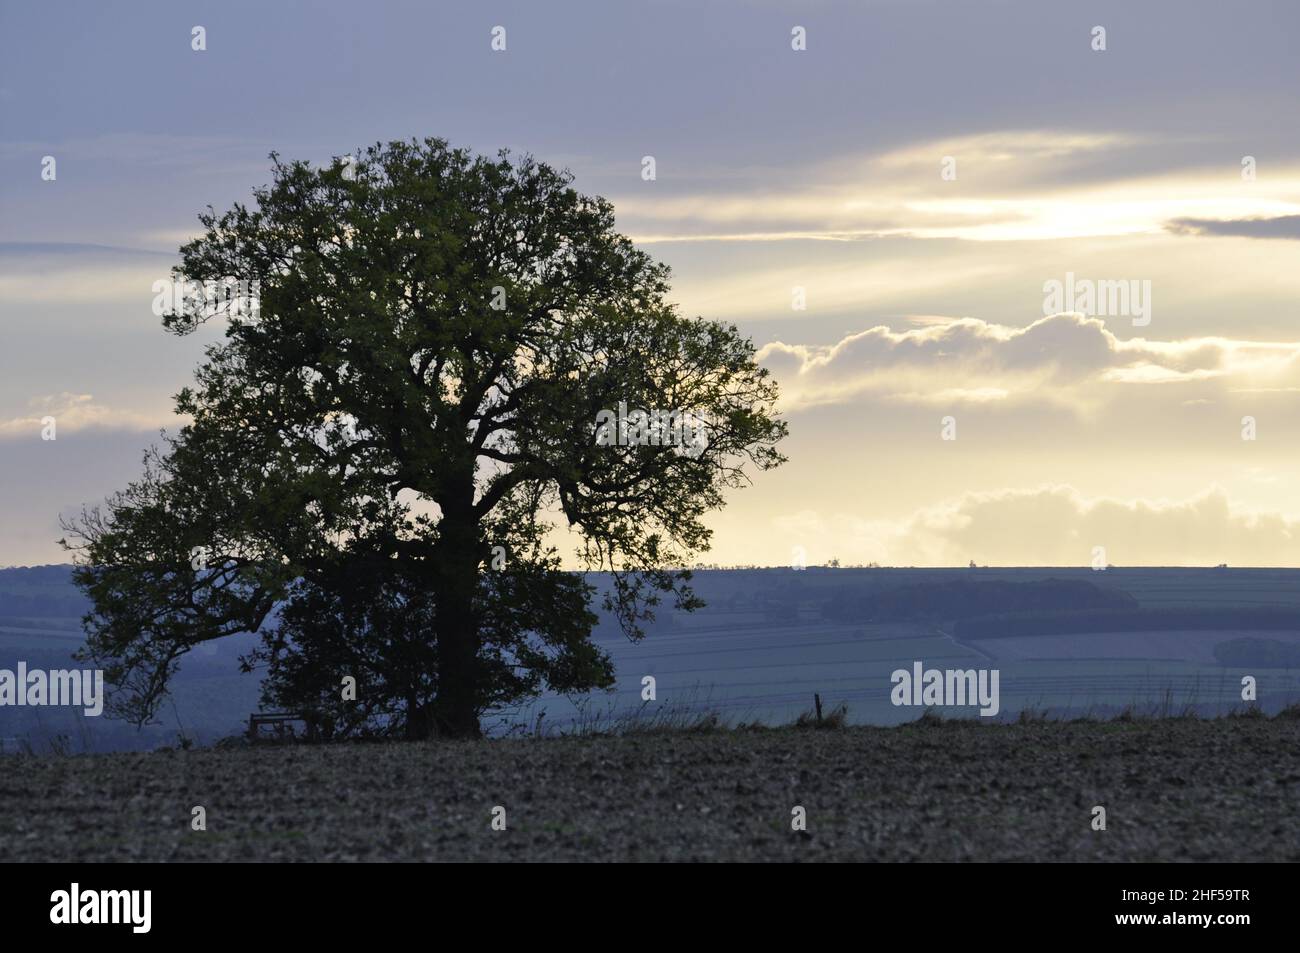 Ash tree in the evening, south-east of Sledmere, East Riding, Yorkshire, England, UK. Stock Photo